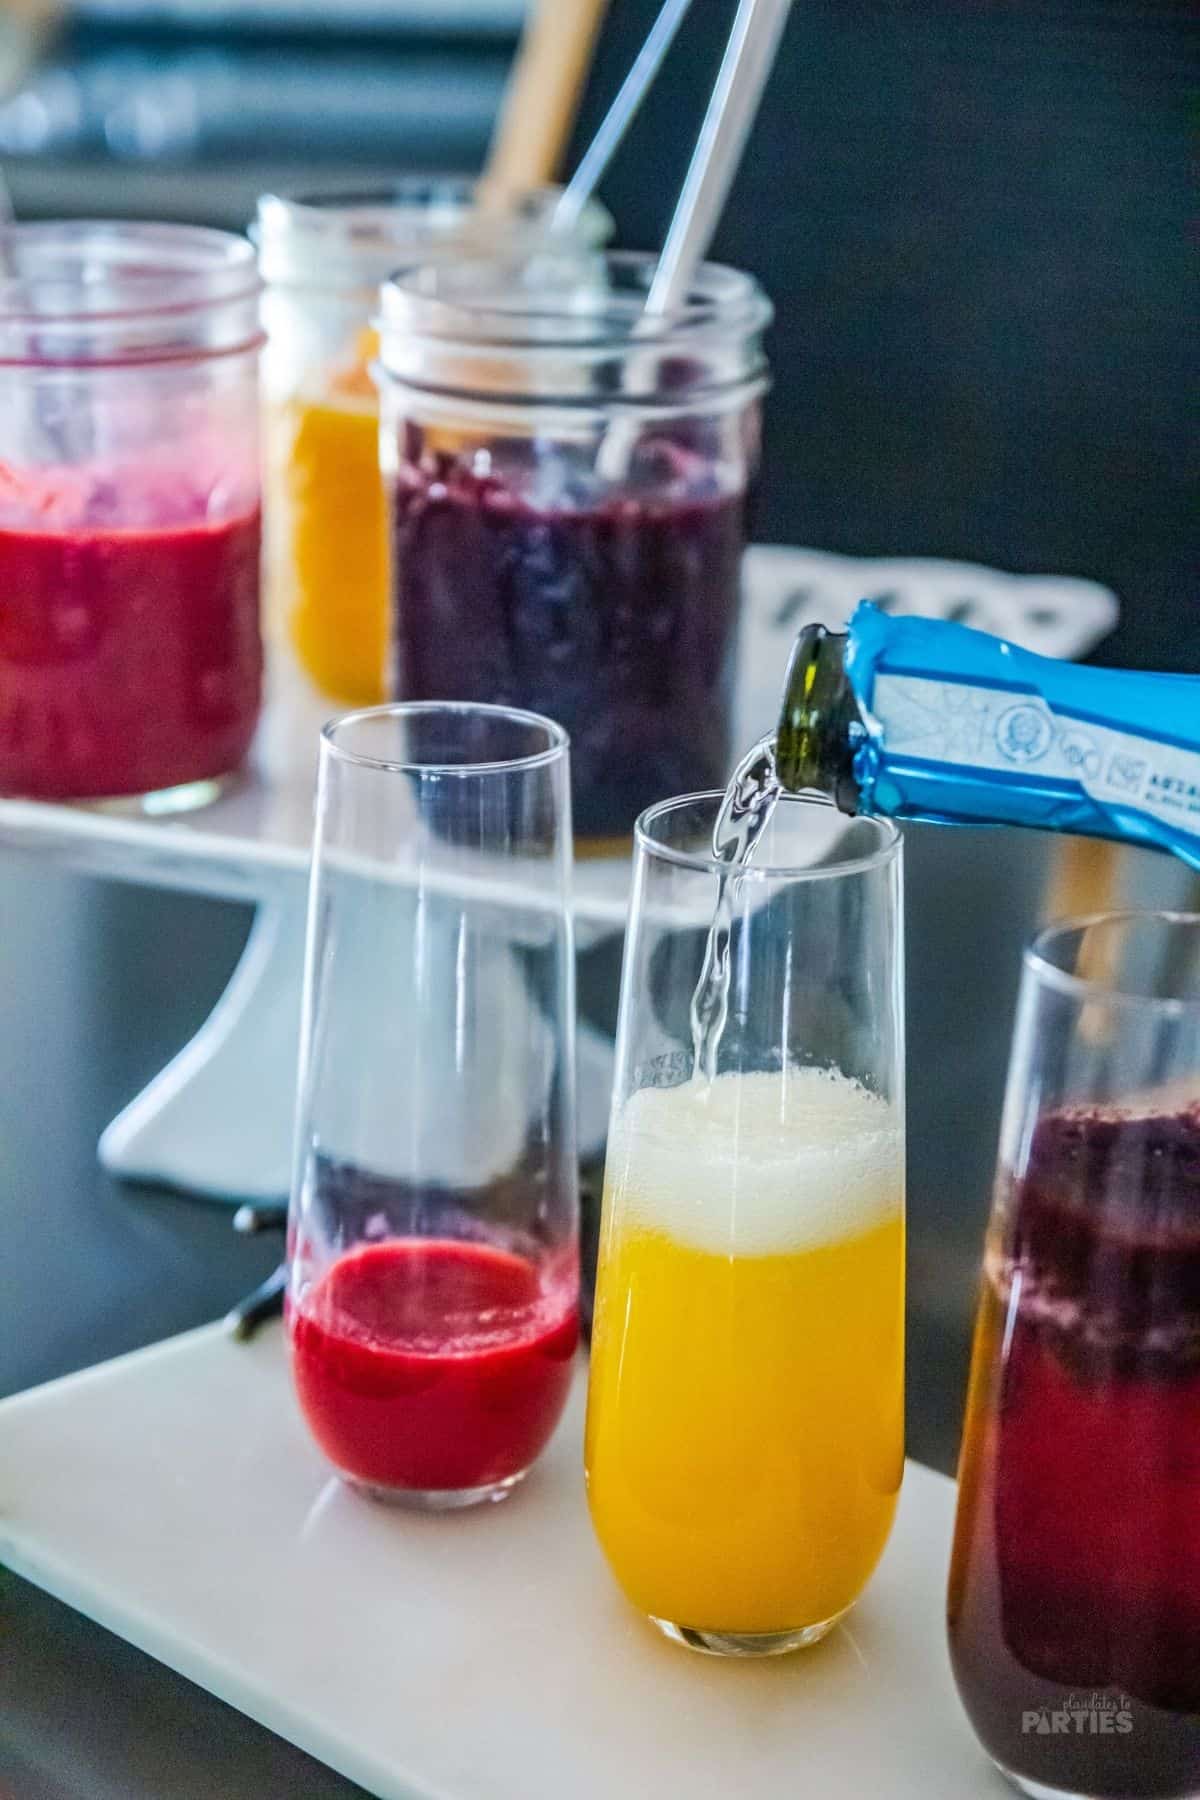 Pouring champagne into flutes with fruit puree.